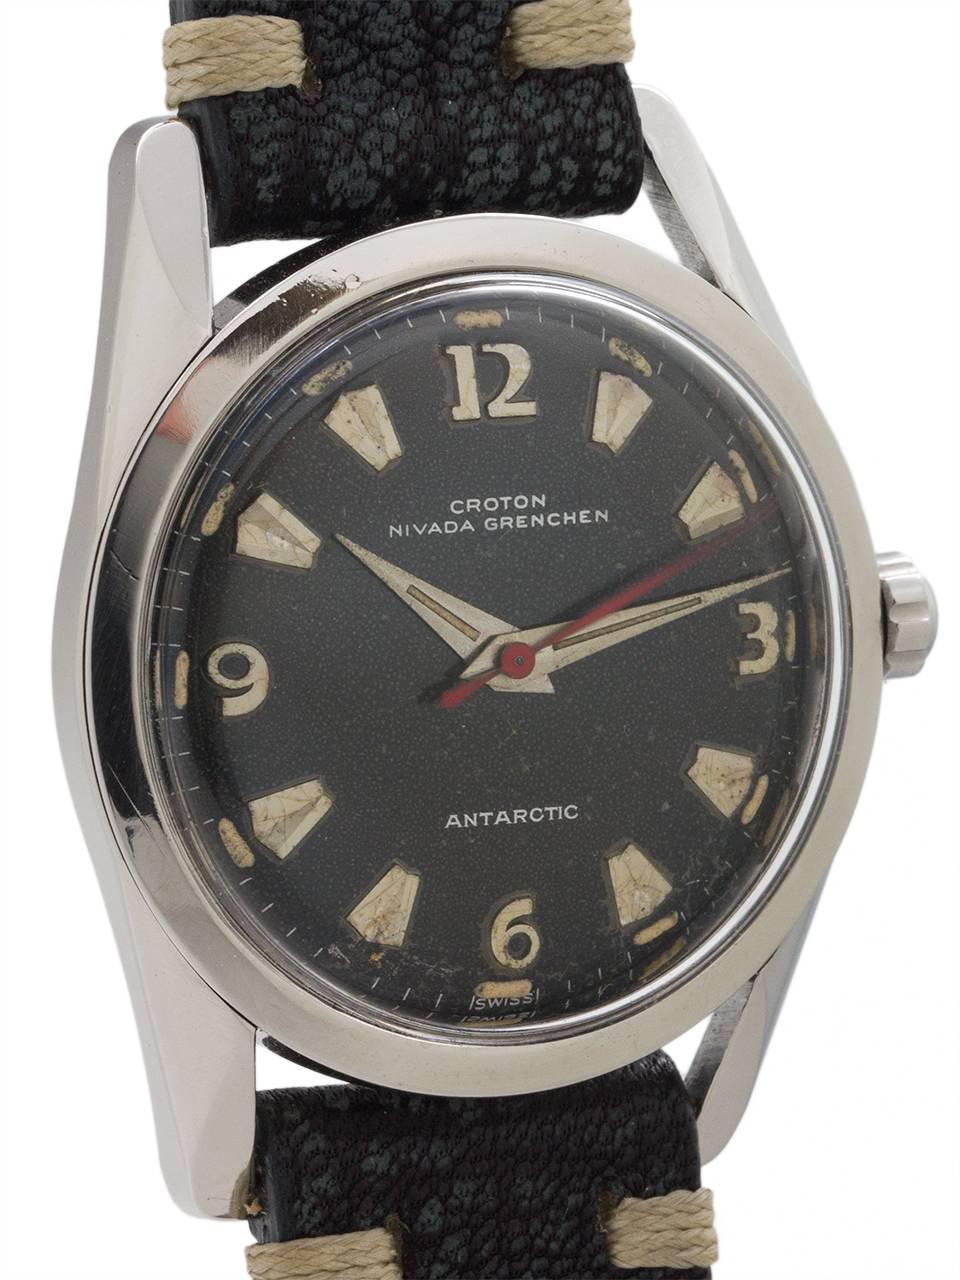 Croton Stainless Steel Antarctic circa 1960’s. 34mm diameter case with screw down back, long 3 sided lugs, and smooth stainless steel bezel. Very pleasing original black patinated dial, luminous dauphine hour and minute hands, and a red seconds